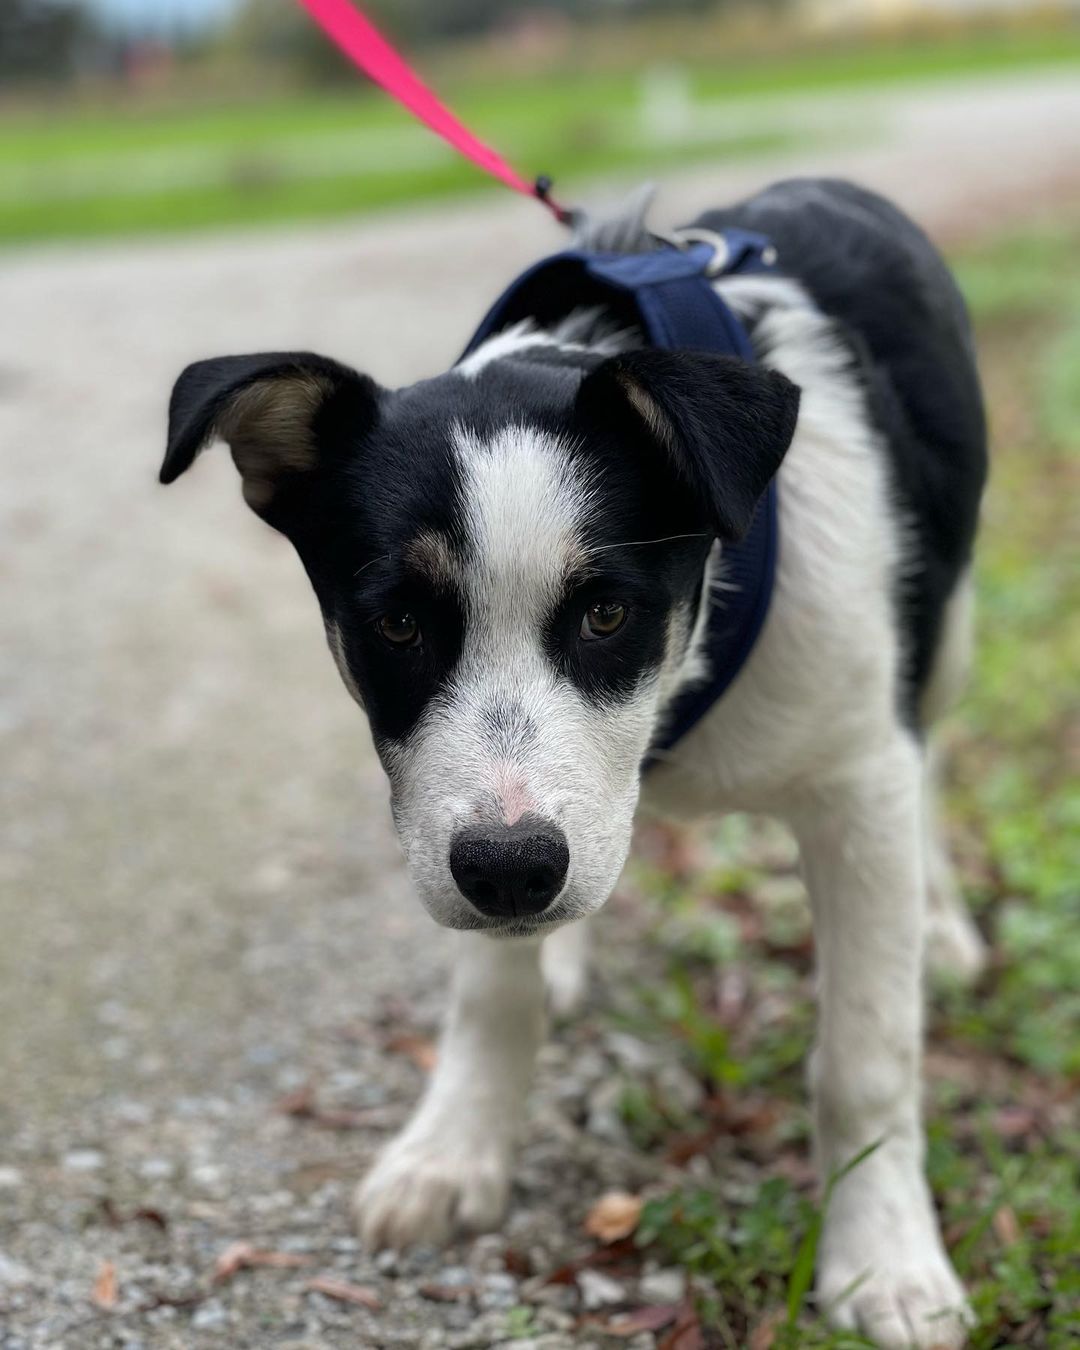 Meet Rocky Road! This 4 month old <a target='_blank' href='https://www.instagram.com/explore/tags/aussie/'>#aussie</a> <a target='_blank' href='https://www.instagram.com/explore/tags/shepherdmix/'>#shepherdmix</a> boy was in need of rescue when his family had an unexpected litter. They gave the other pups away but needed help with this guy. This sweet boy is pretty shut down and scared but we know the power of his amazing <a target='_blank' href='https://www.instagram.com/explore/tags/foster/'>#foster</a> family will have him good as new in no time. We expect Rocky Road to be in the 60 plus pound range as an adult. Welcome to the <a target='_blank' href='https://www.instagram.com/explore/tags/jakeswishfamily/'>#jakeswishfamily</a> sweet boy! We promise it’s all warm beds, full bowls of food and lots of kisses from now on. <a target='_blank' href='https://www.instagram.com/explore/tags/fosteringsaveslives/'>#fosteringsaveslives</a> <a target='_blank' href='https://www.instagram.com/explore/tags/jakeswishrescue/'>#jakeswishrescue</a> <a target='_blank' href='https://www.instagram.com/explore/tags/adoptdontshop/'>#adoptdontshop</a>